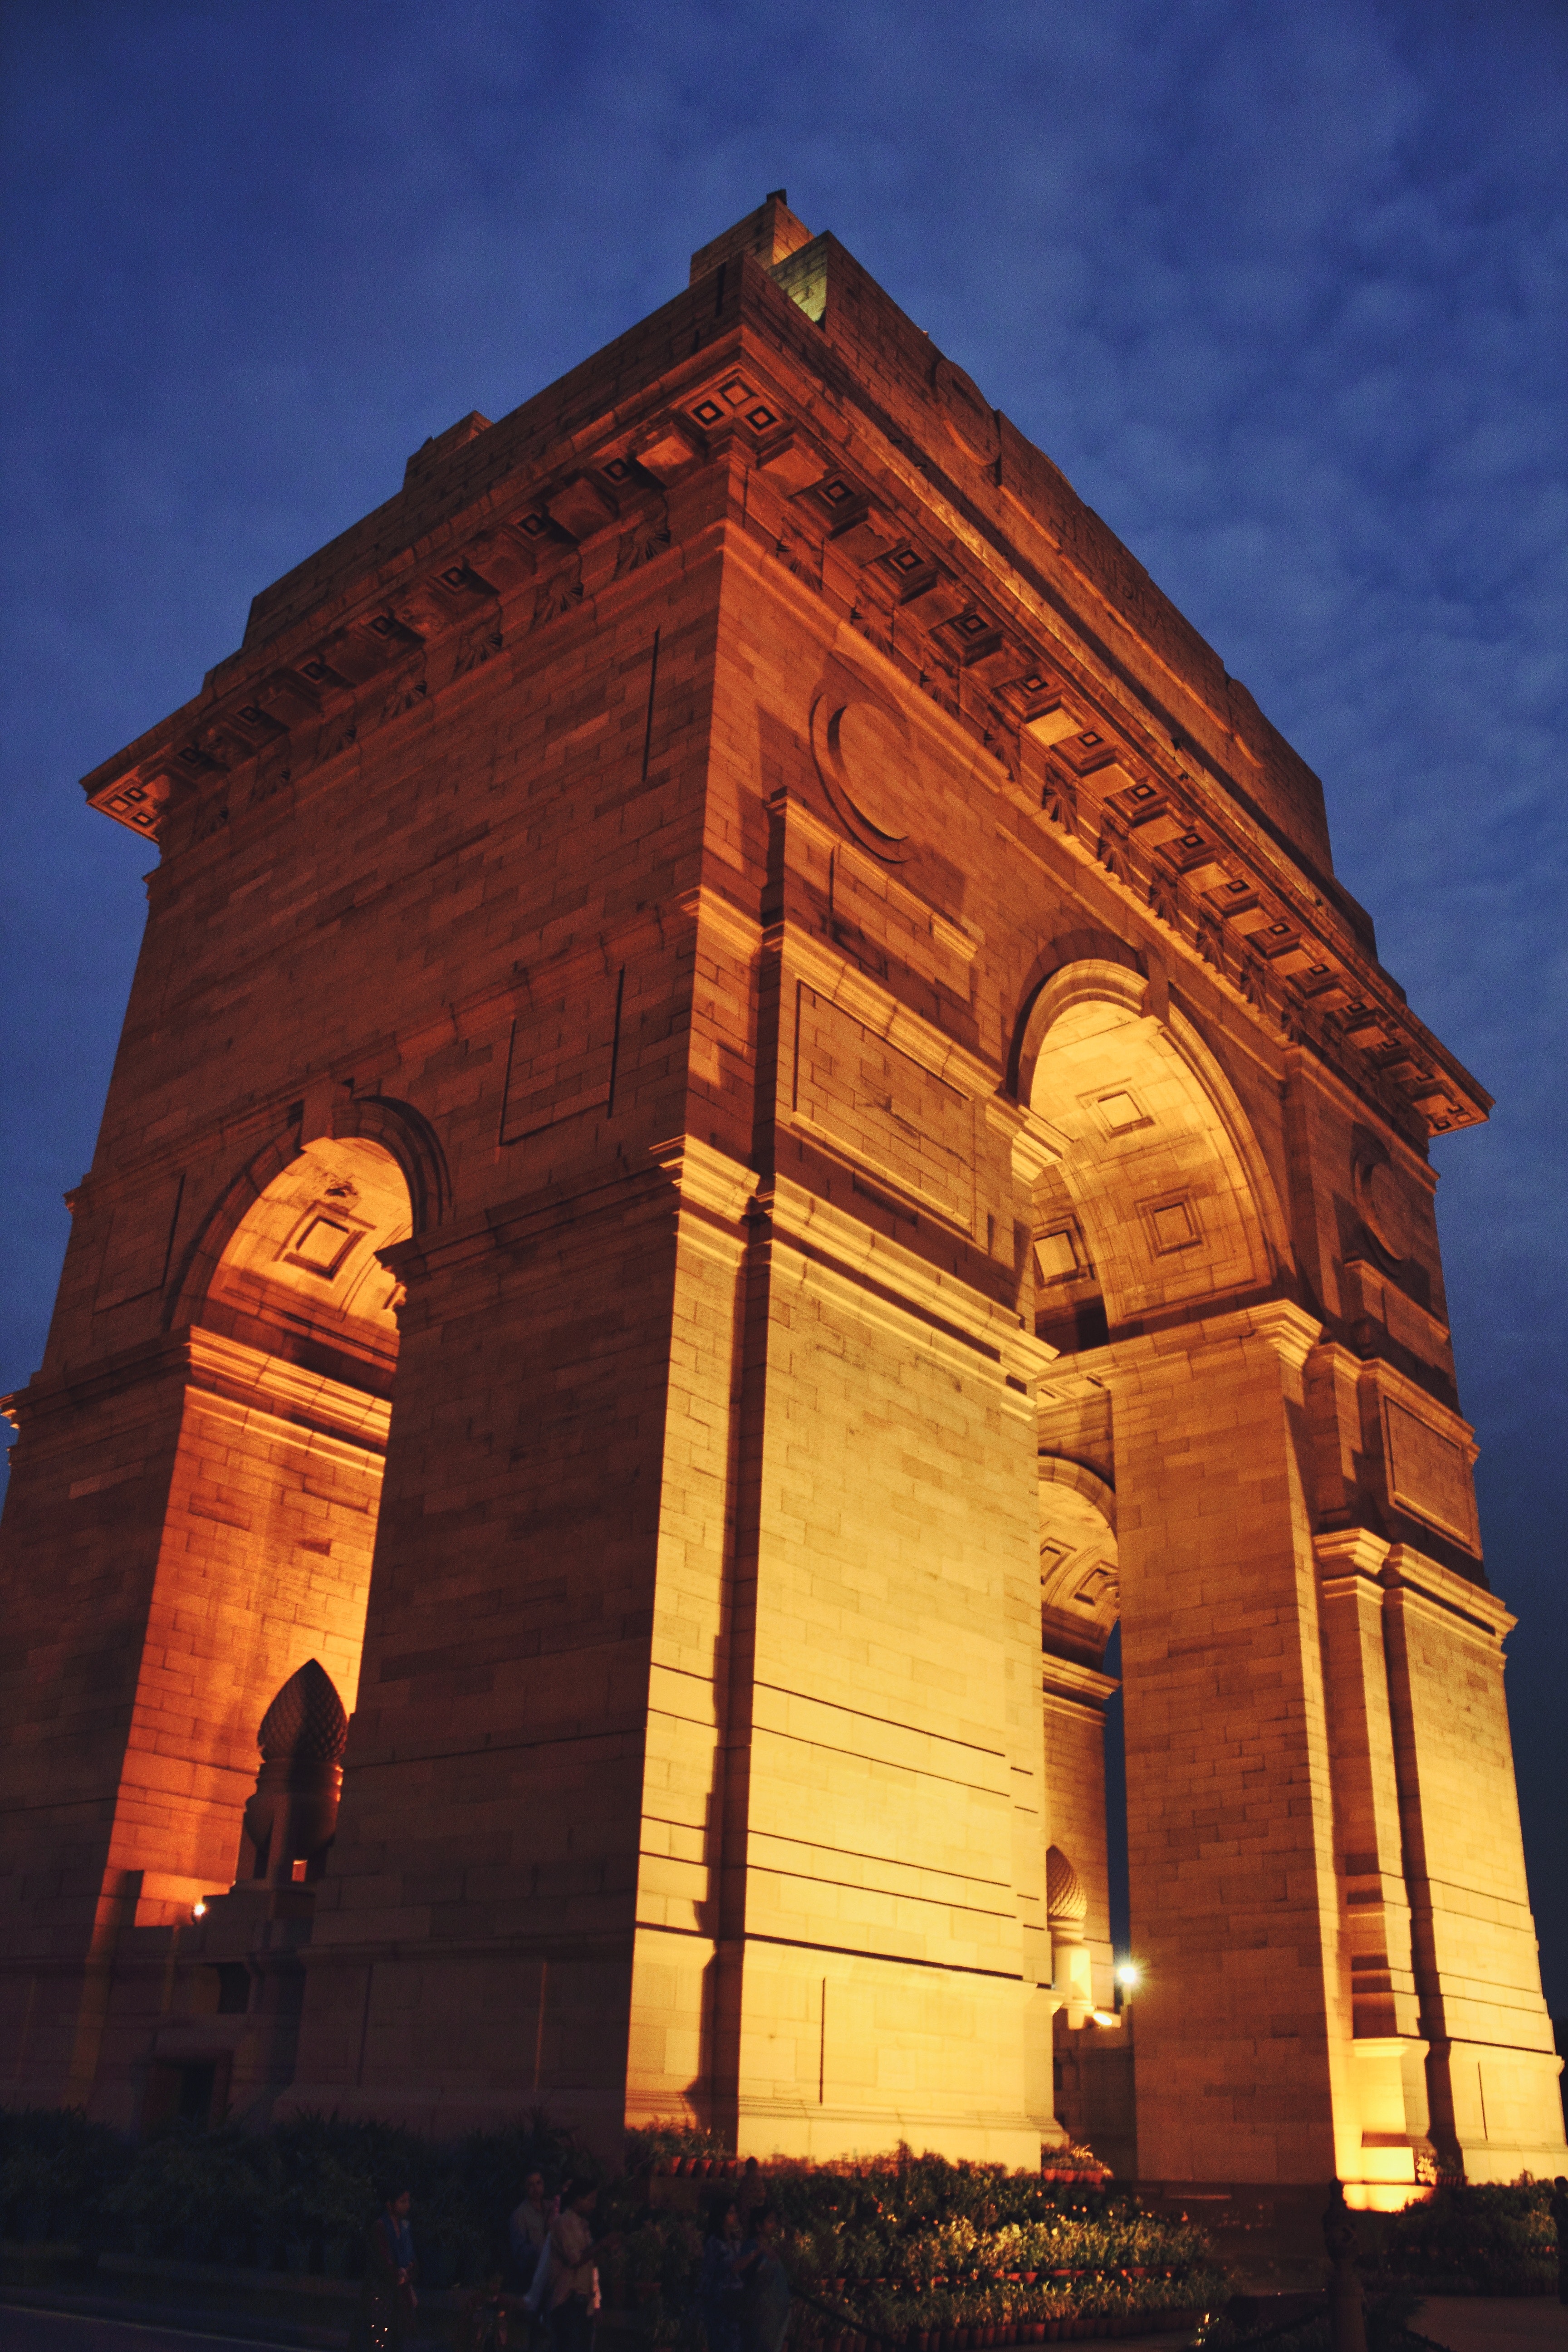 India Gate Image Wallpapers